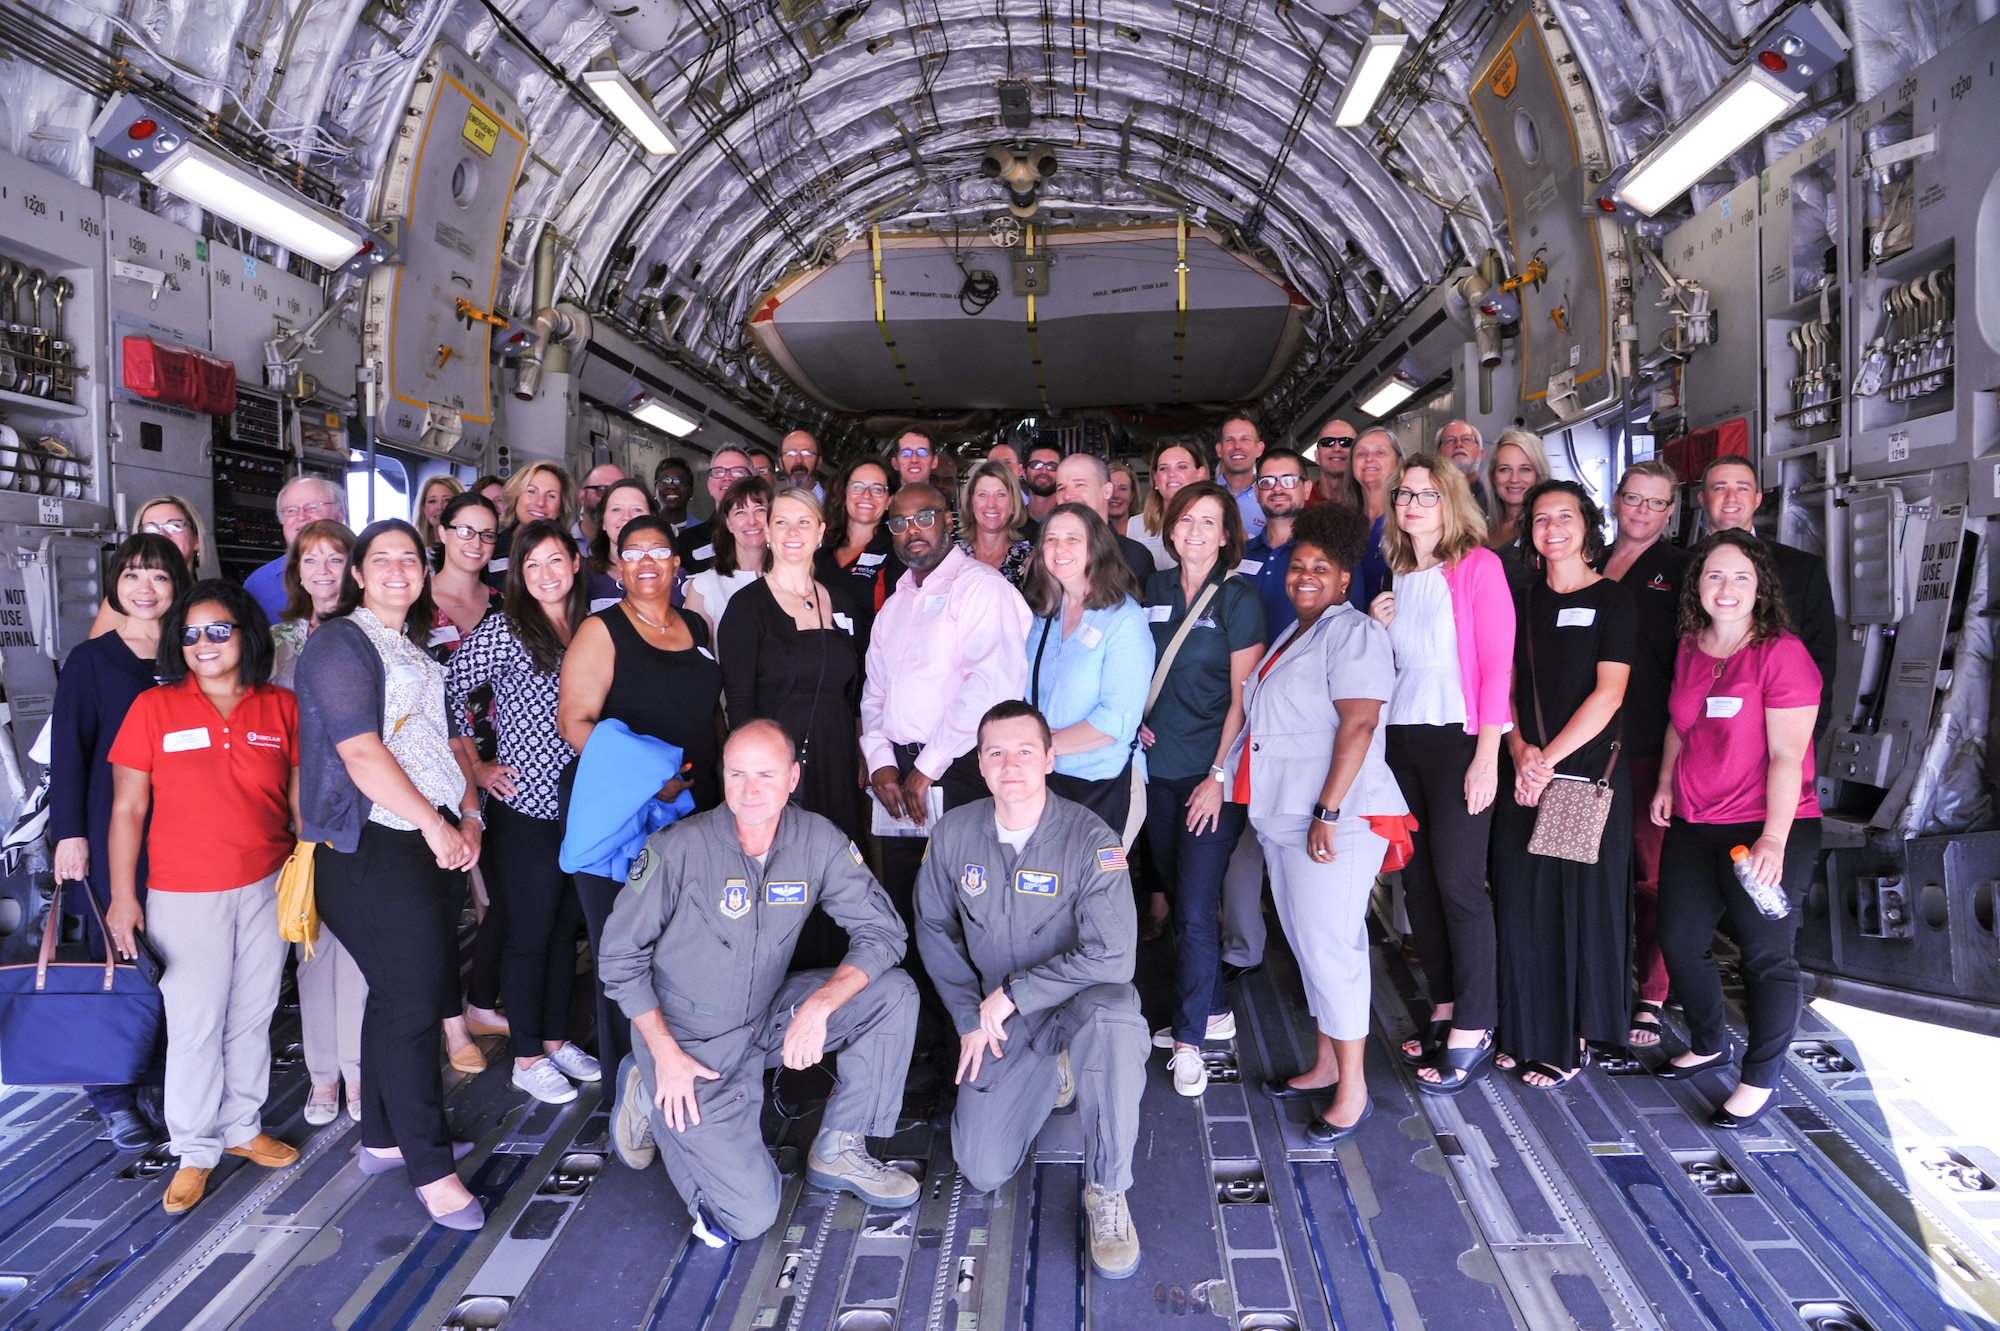 Guests from the Miami Valley Higher Education Consortium took a look inside one of the 445th Airlift Wing's C-17 aircraft. The plane visit was part of an all day tour that took place August 6. (U.S. Air Force photo/Pamela Piccoli)